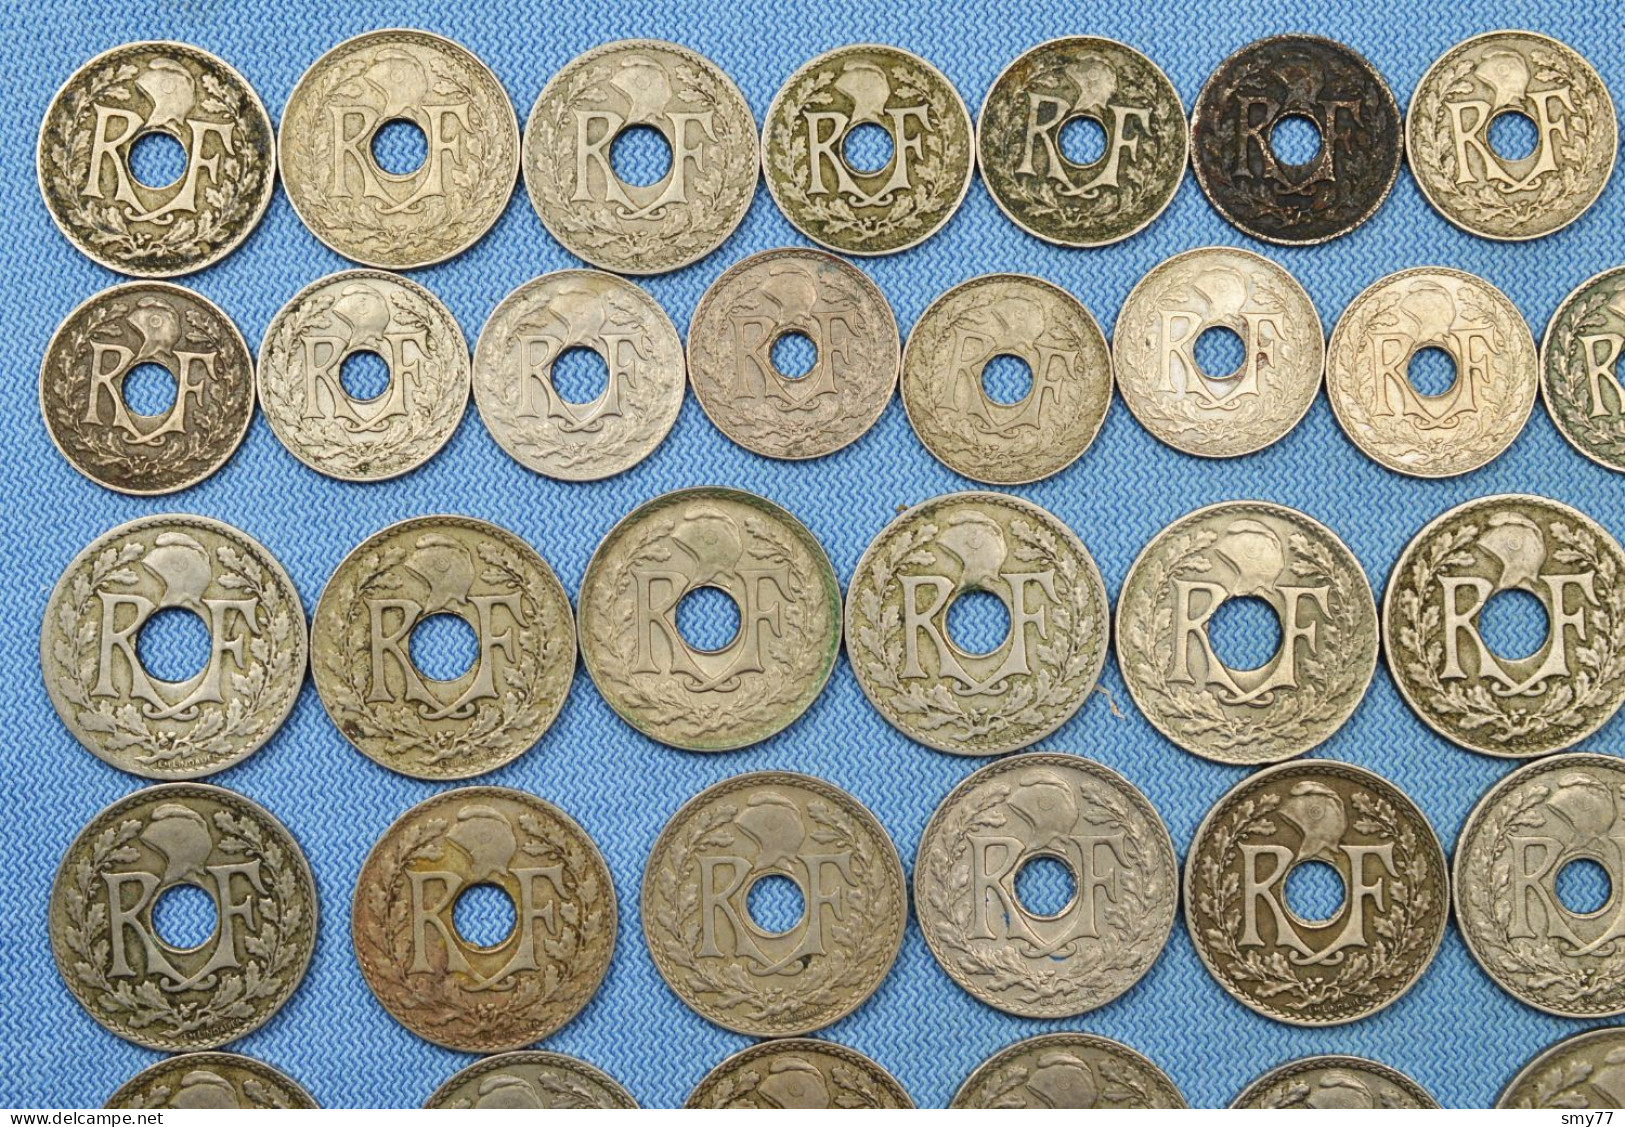 France • Lot Lindauer 62x • All different • 5 10 25 centimes • See details and pictures • mostly in high grade • [24-680